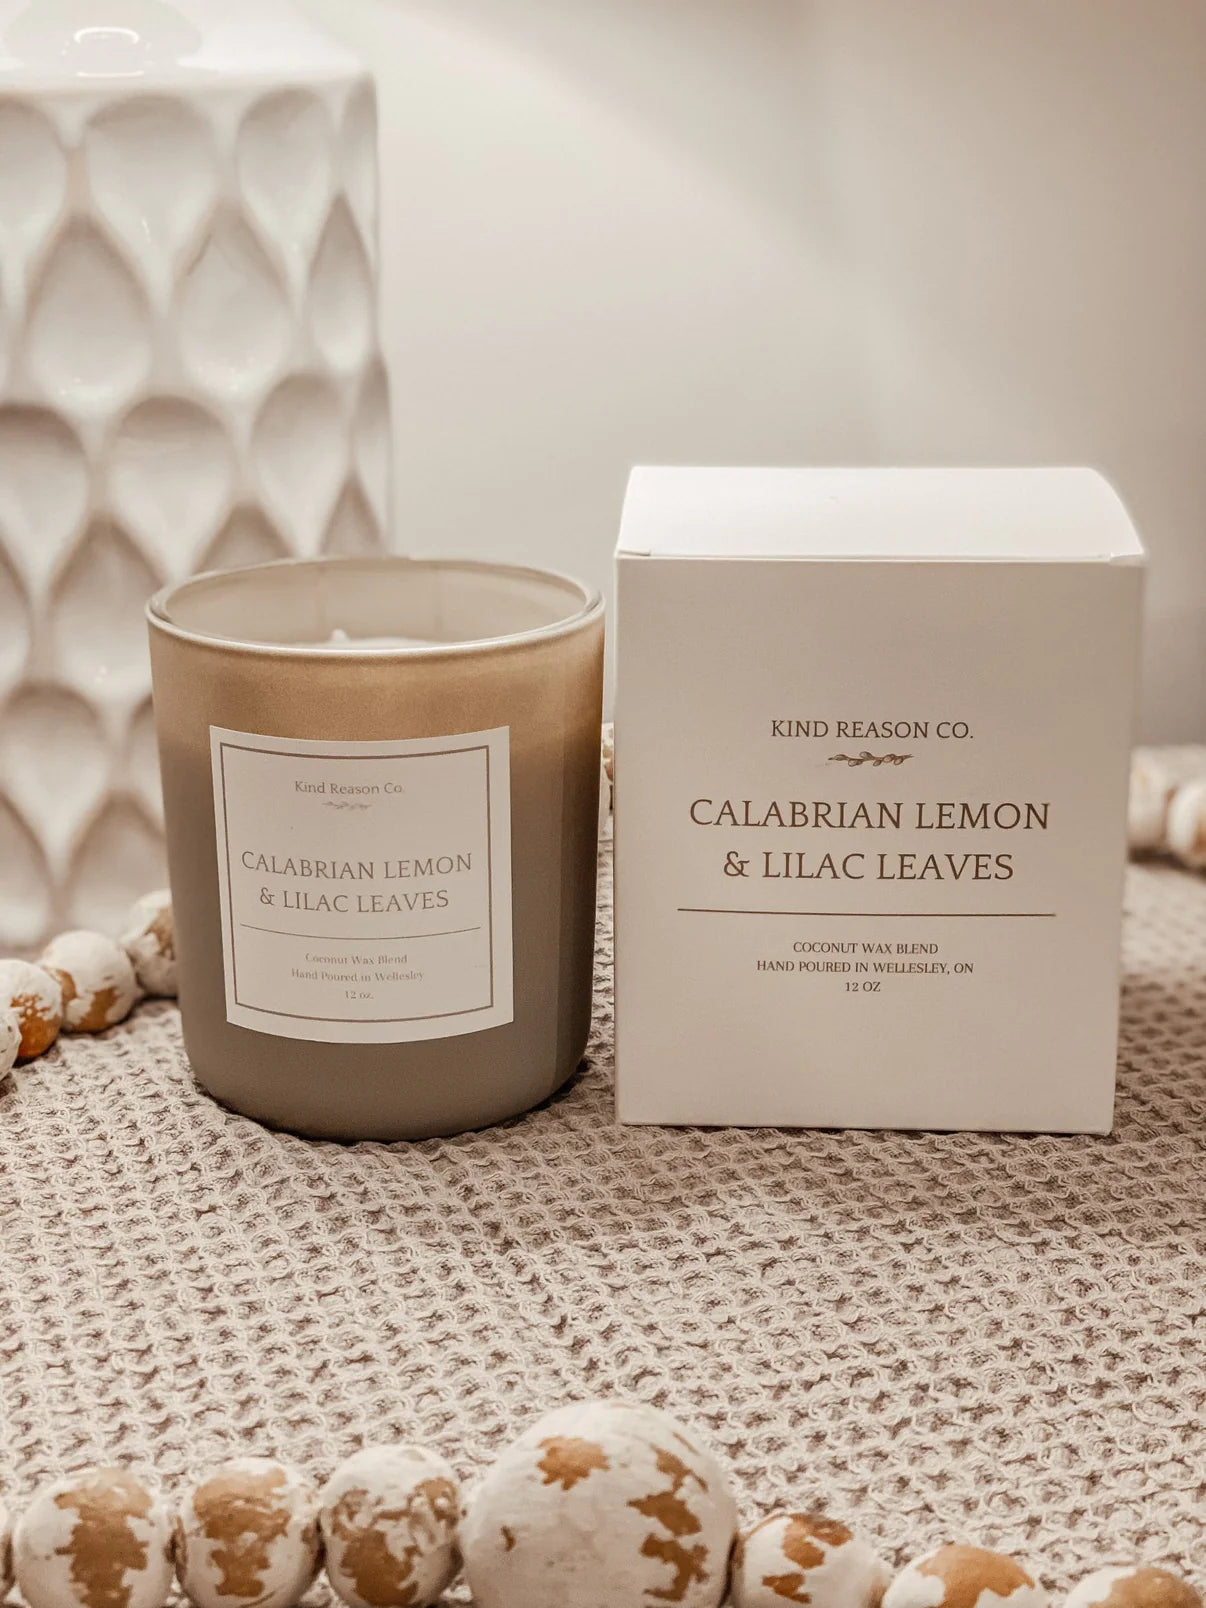 Calabrian Lemon & Lilac Leaves candle